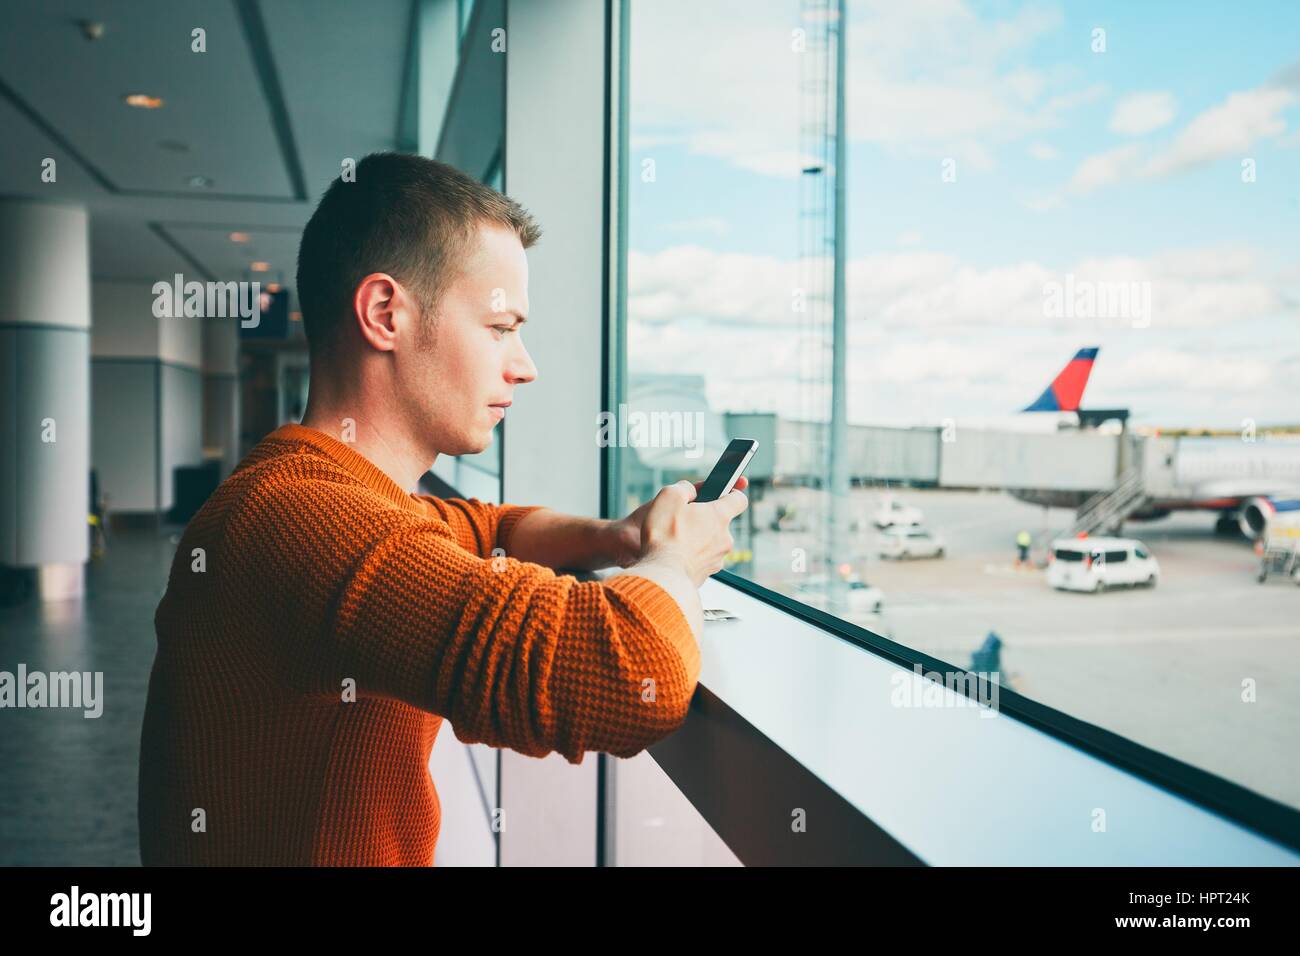 Young man with mobile phone waiting for a delayed flight inside airport terminal. Stock Photo